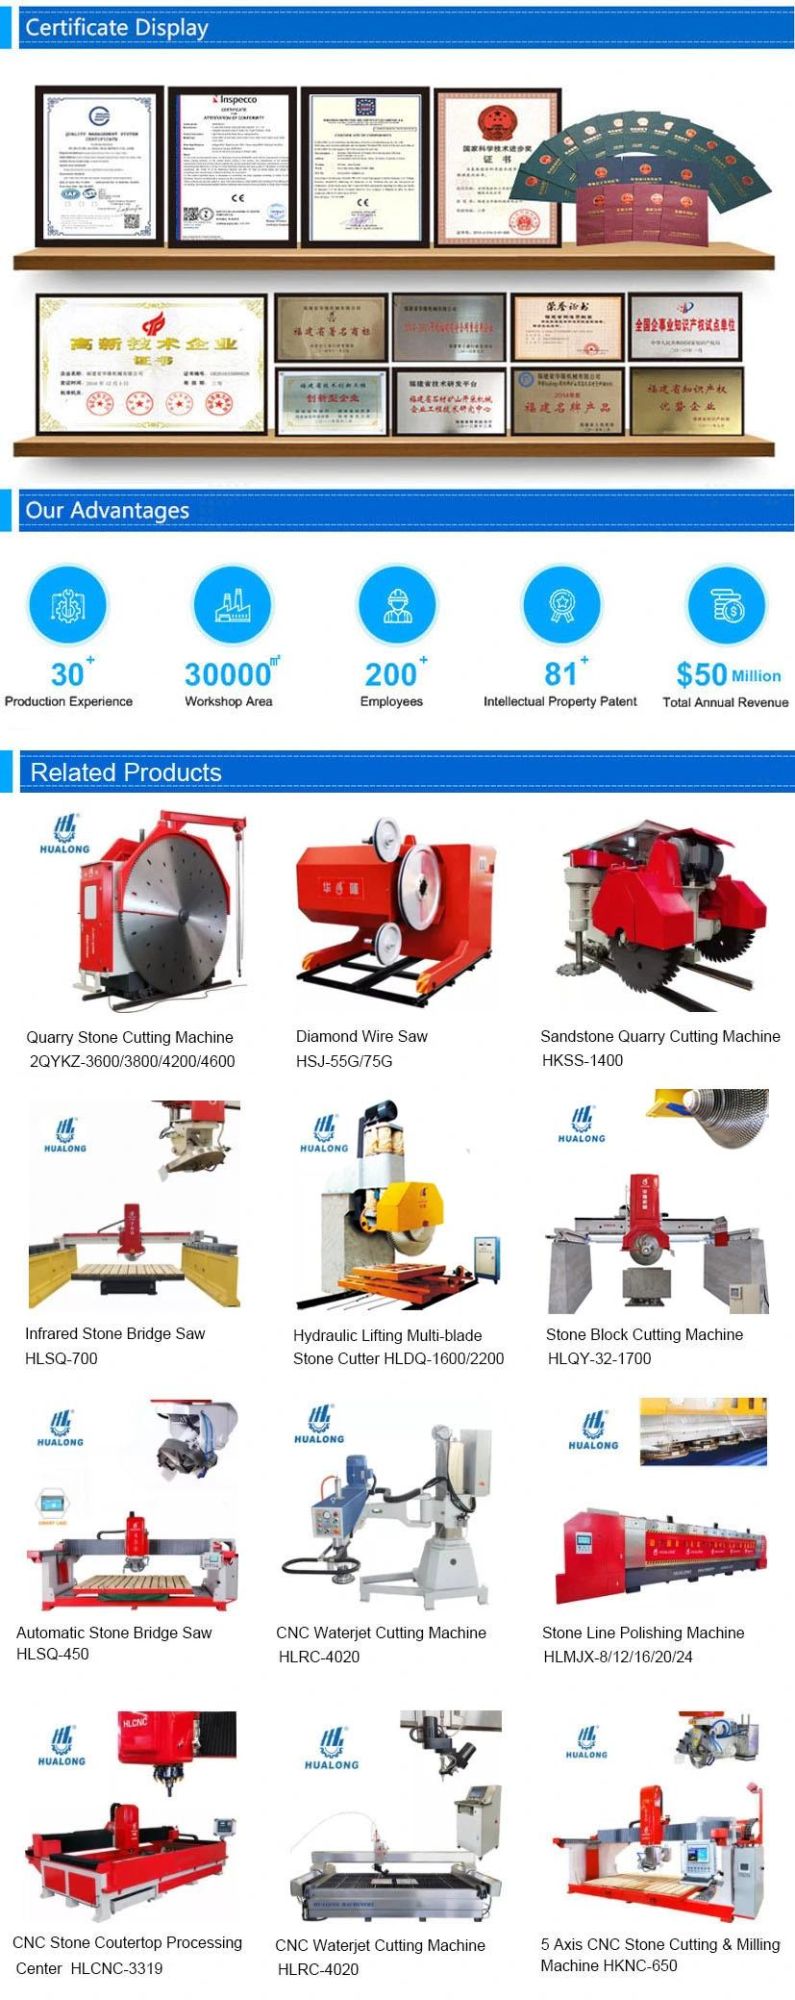 Hualong Stone Machinery High Efficiency Twin Blade Rock Rail Saw Natural Stone Block Cutting Machine for Granite Double Saw Quarry Mining Cutter